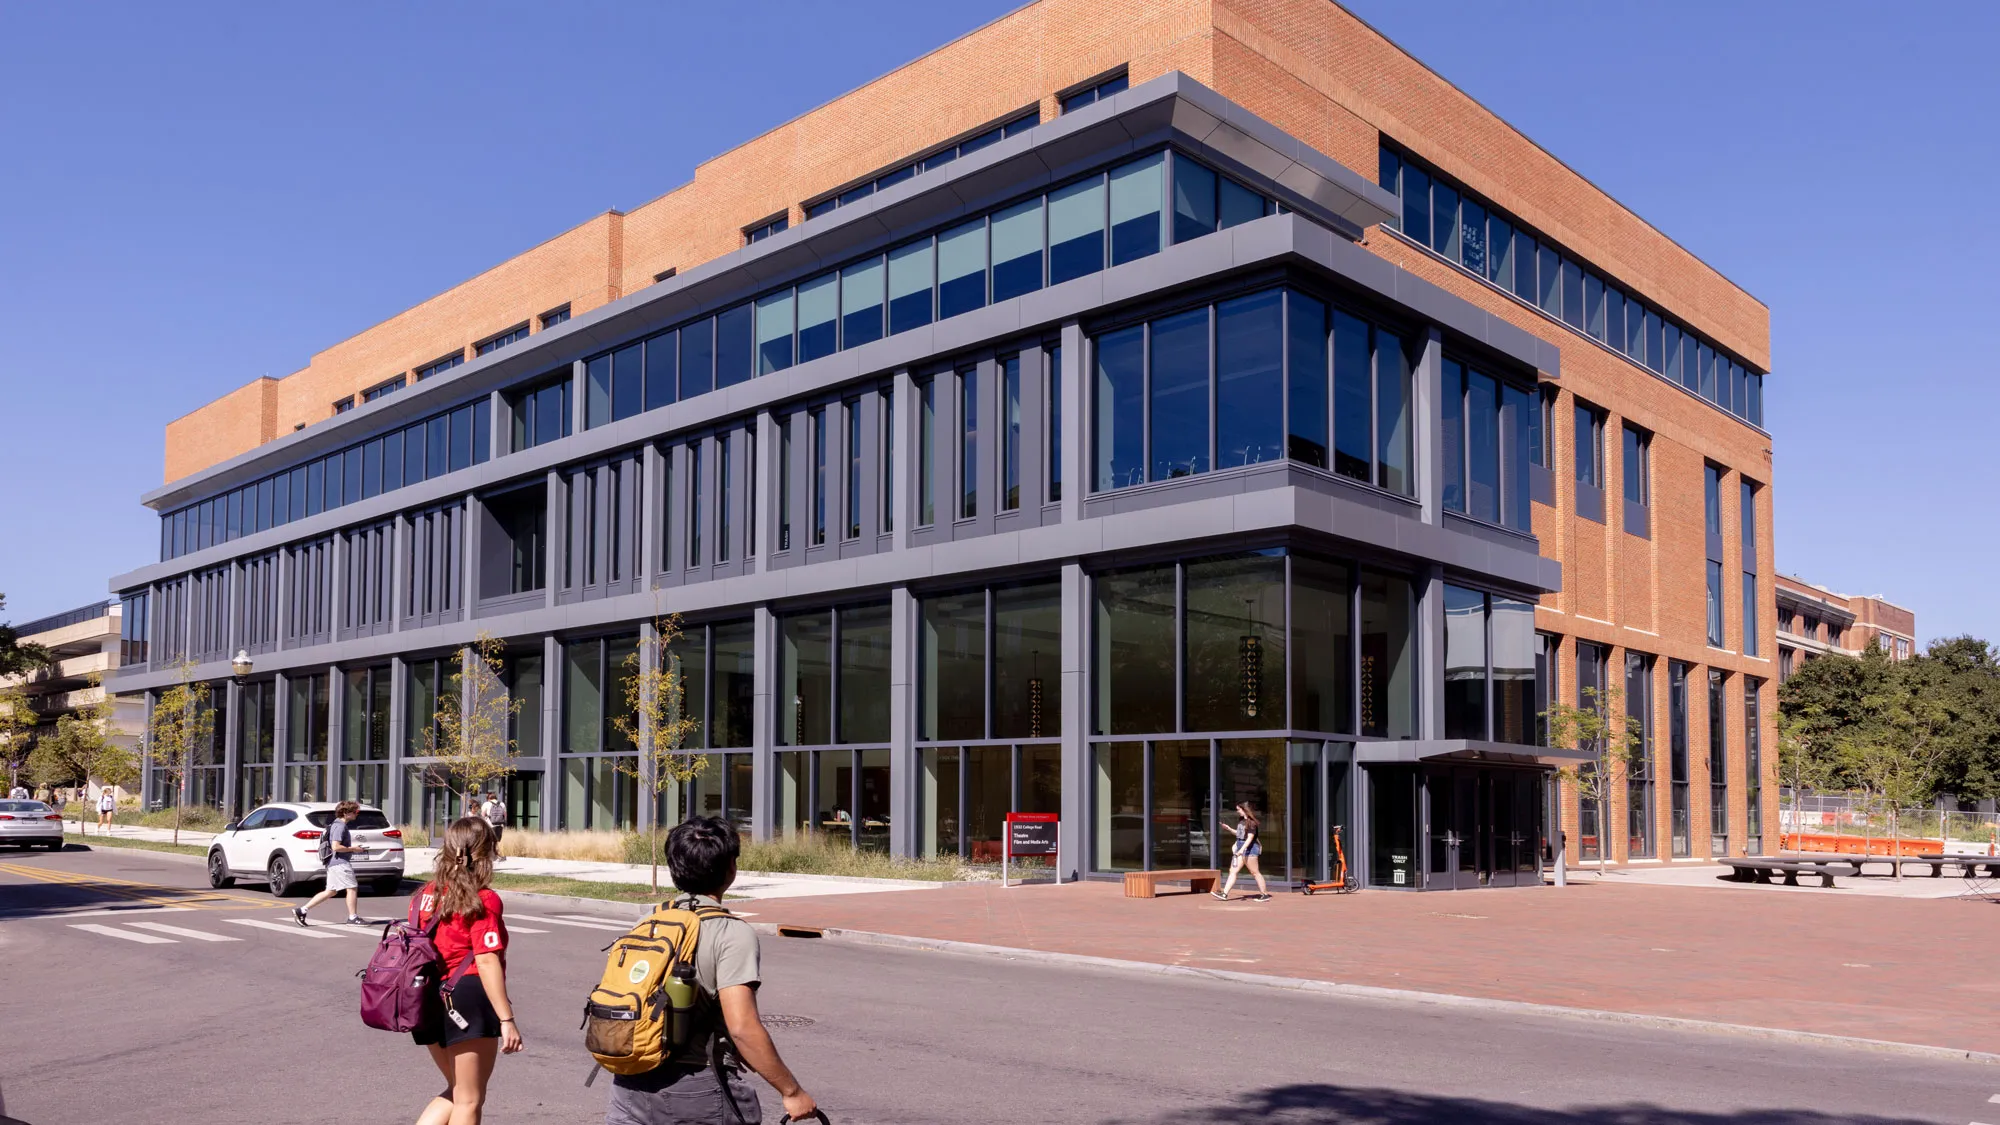 A building that is much longer than it is tall has a facade with two levels of windows and warm colored brick. It looks modern and ready for great things to come from within. Two students cross the street toward the building.